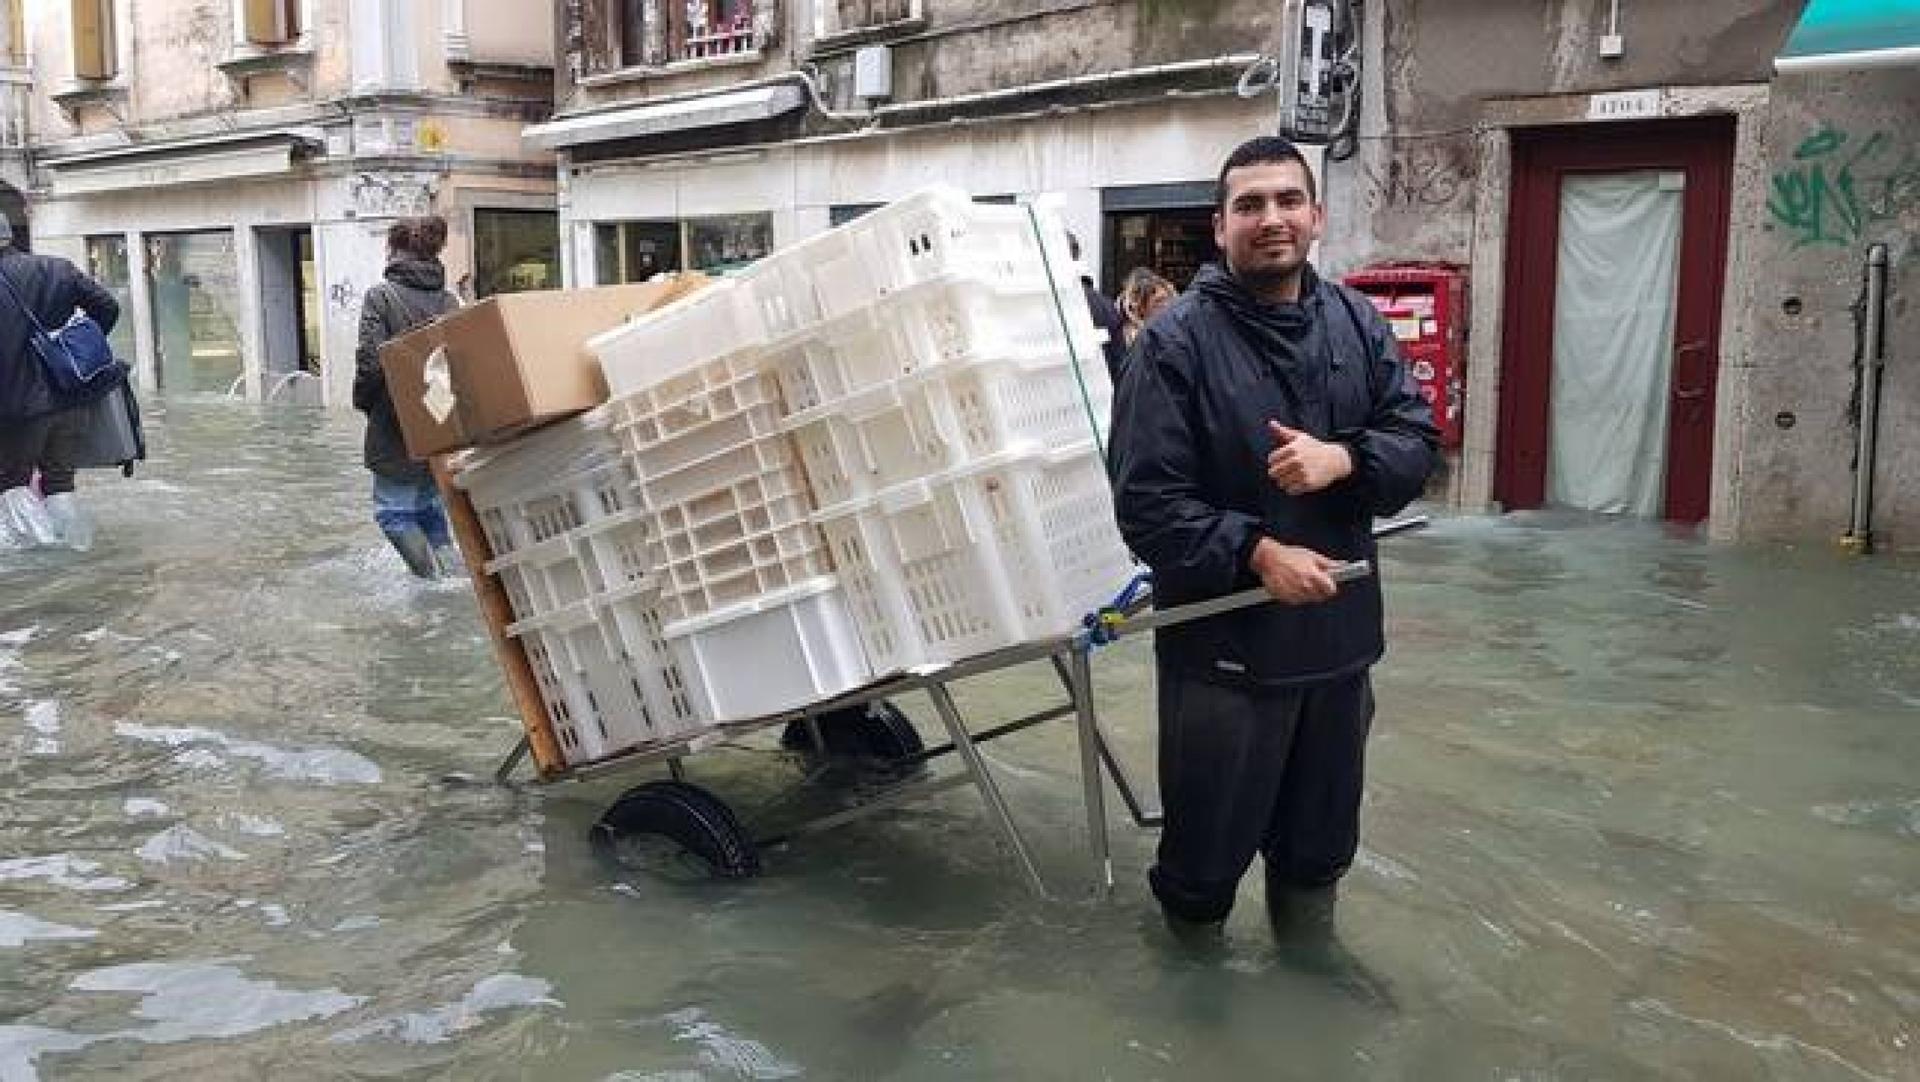 A Rizzo bakery employee delivers bread during the November 2019 floods in Venice. 